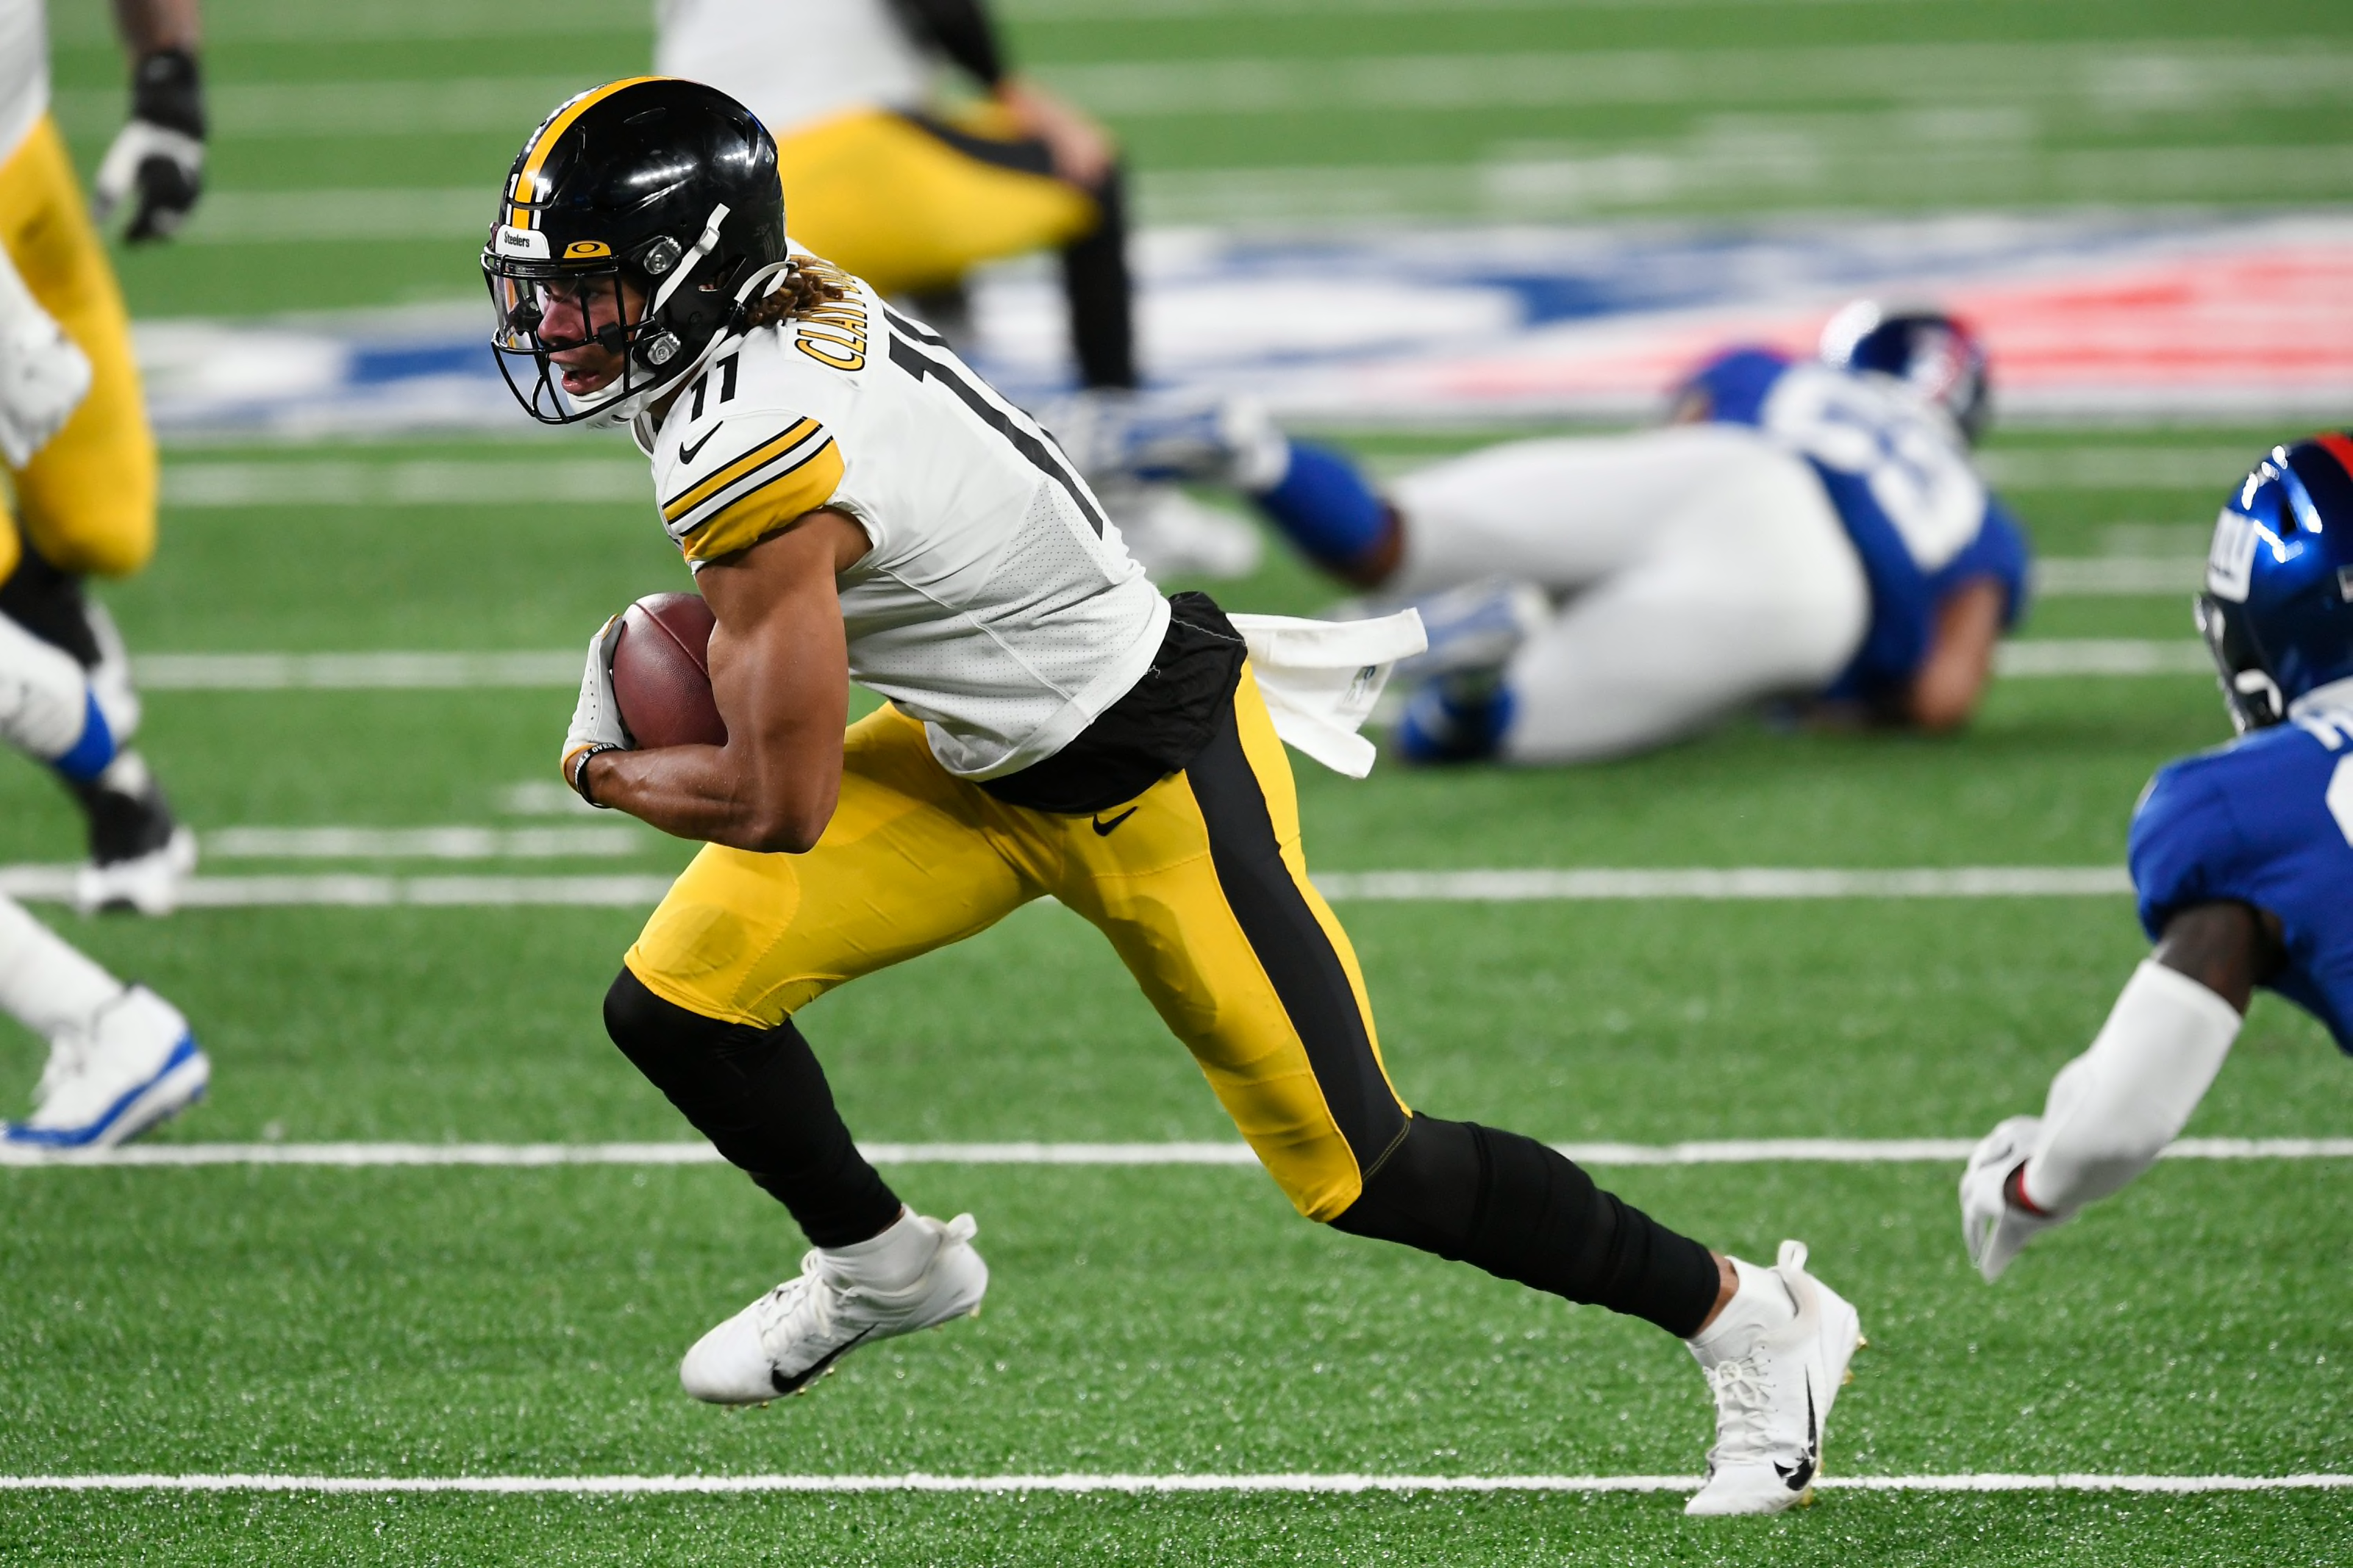 Houston Texans vs. Steelers 3 Key players to watch in Week 3 Page 2